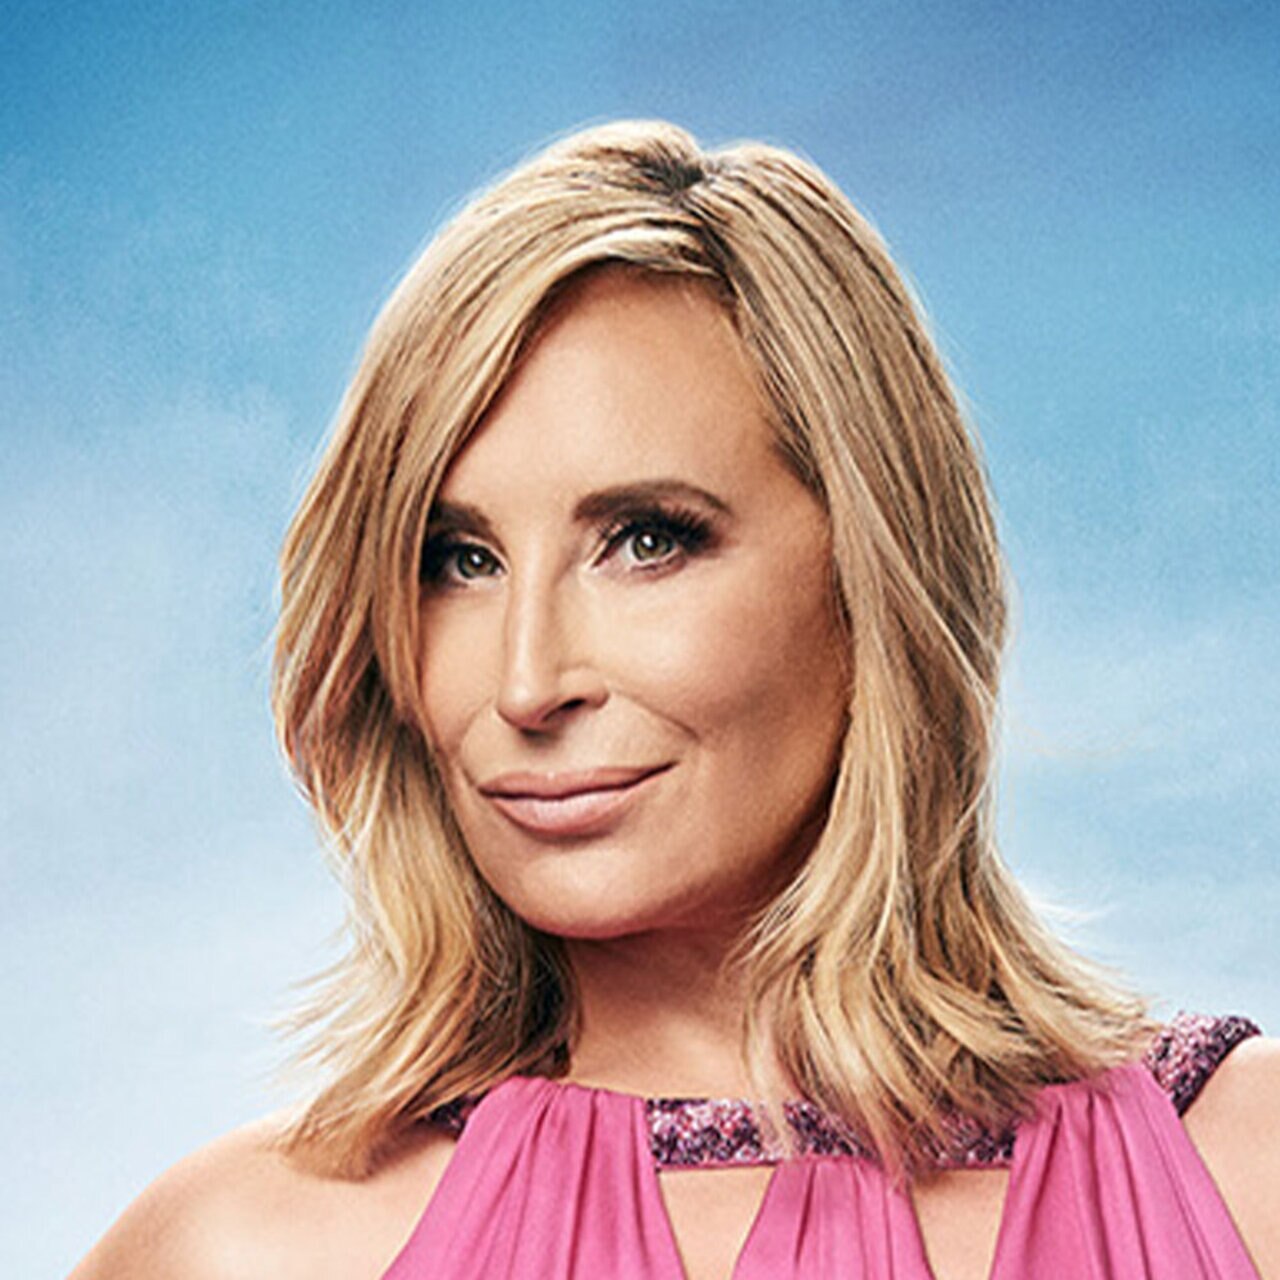 Sonja Morgan The Real Housewives of New York City pic